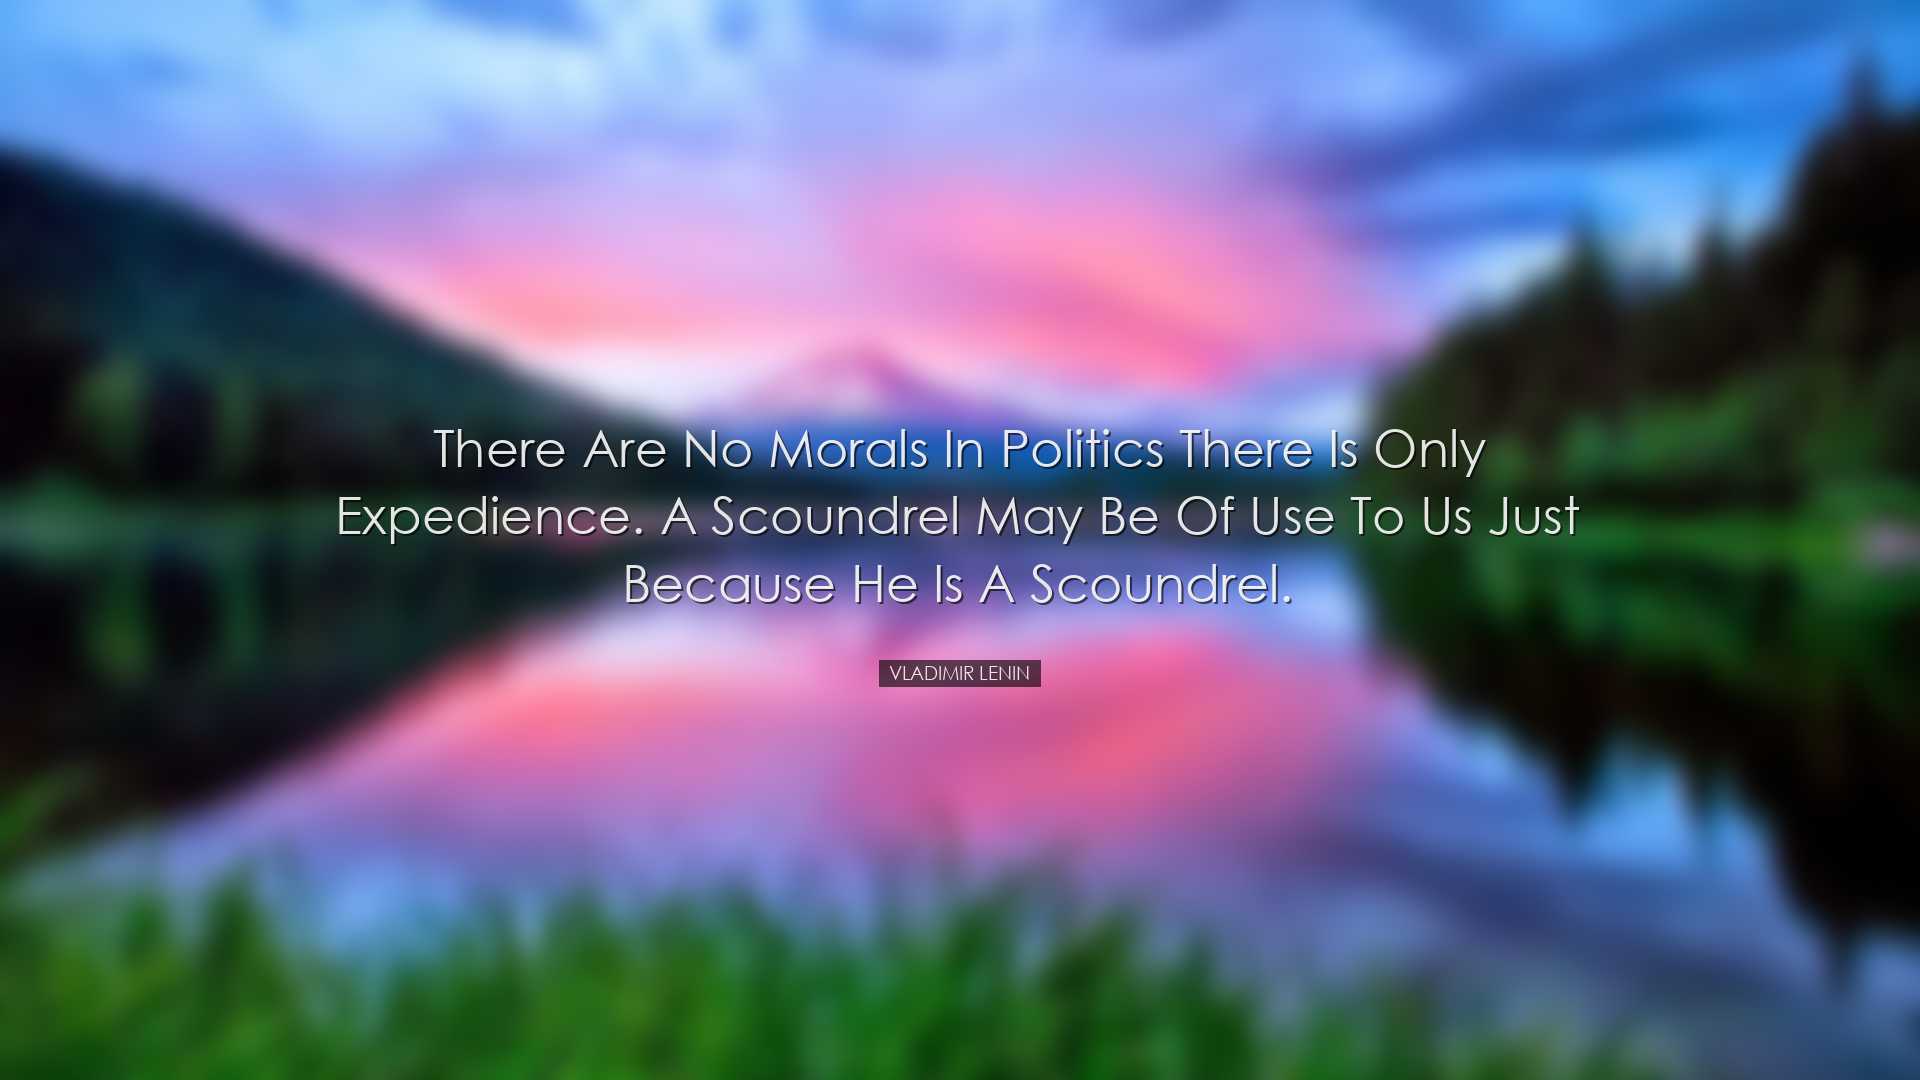 There are no morals in politics there is only expedience. A scound